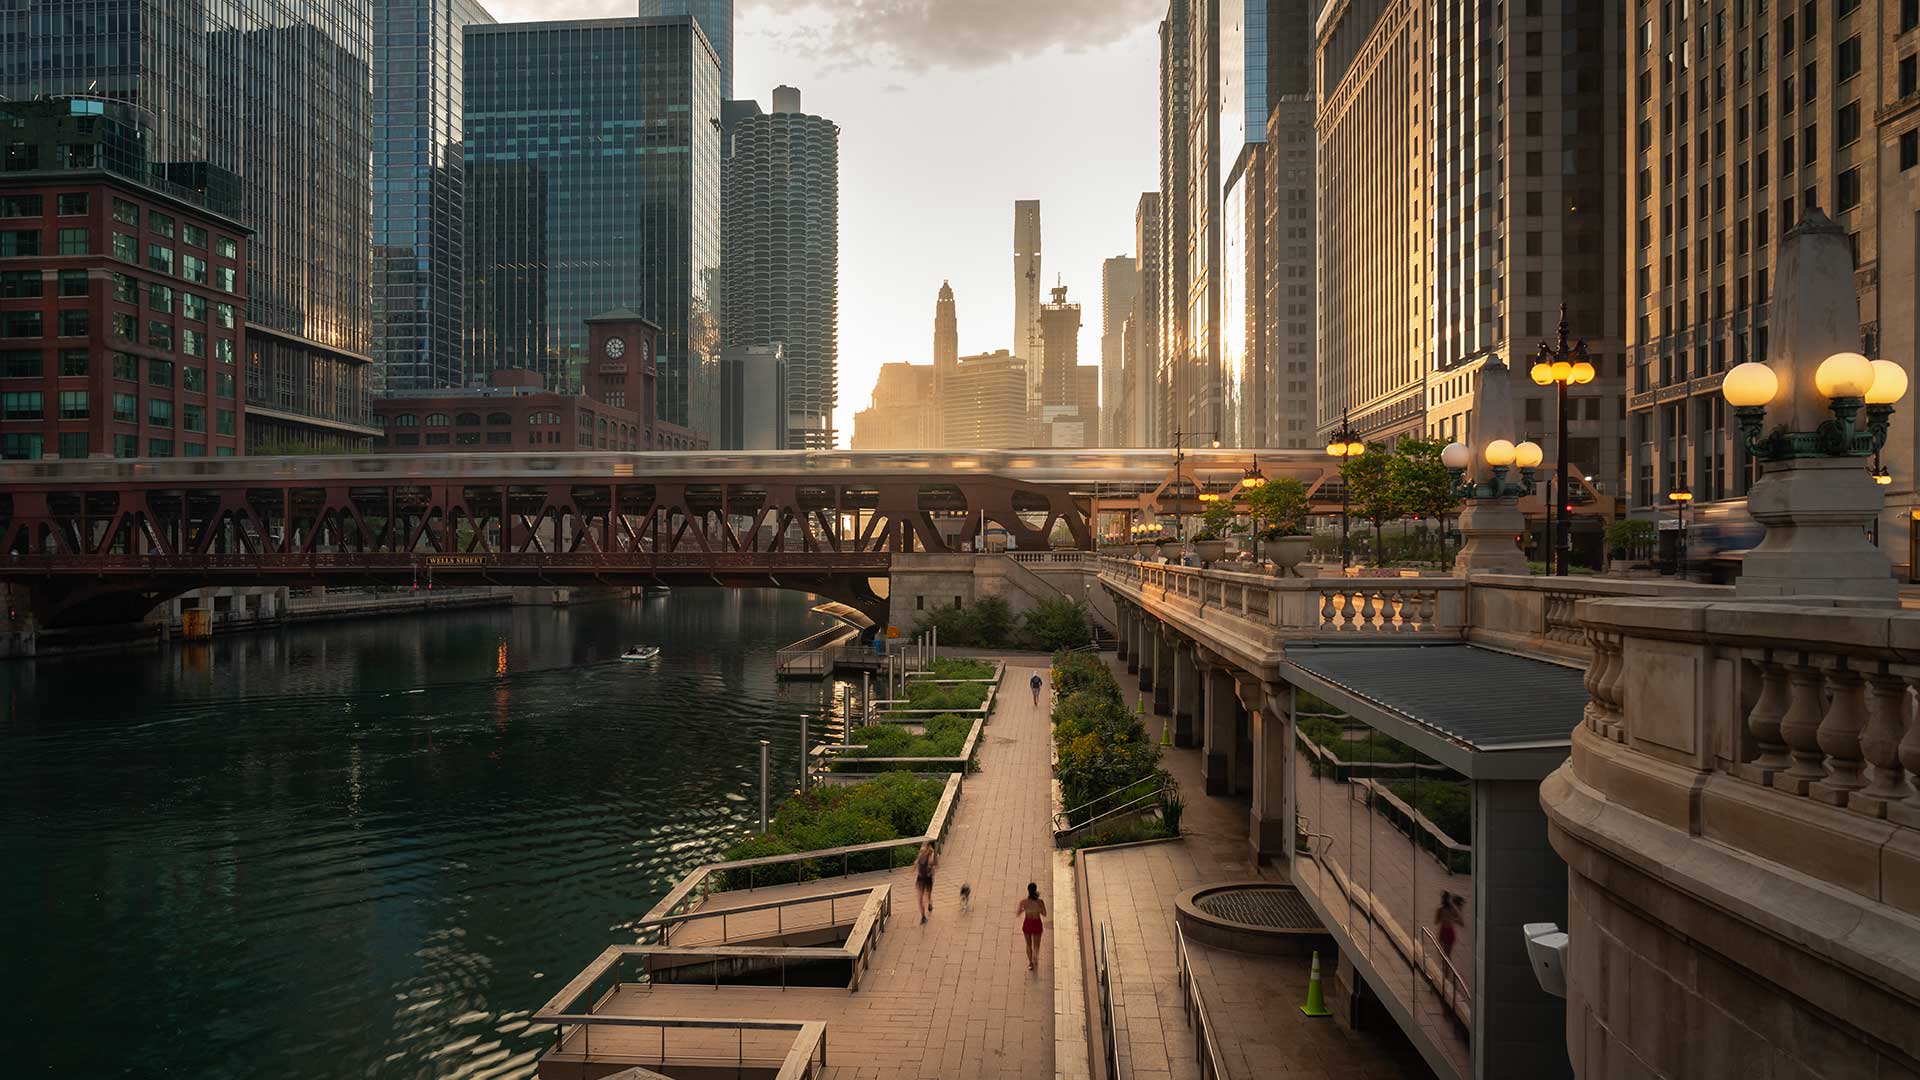 Looking down at the riverfront walkway at dawn in Chicago. There are a few people jogging on the path below. Ahead is a bridge with a train crossing. There are city buildings all around.